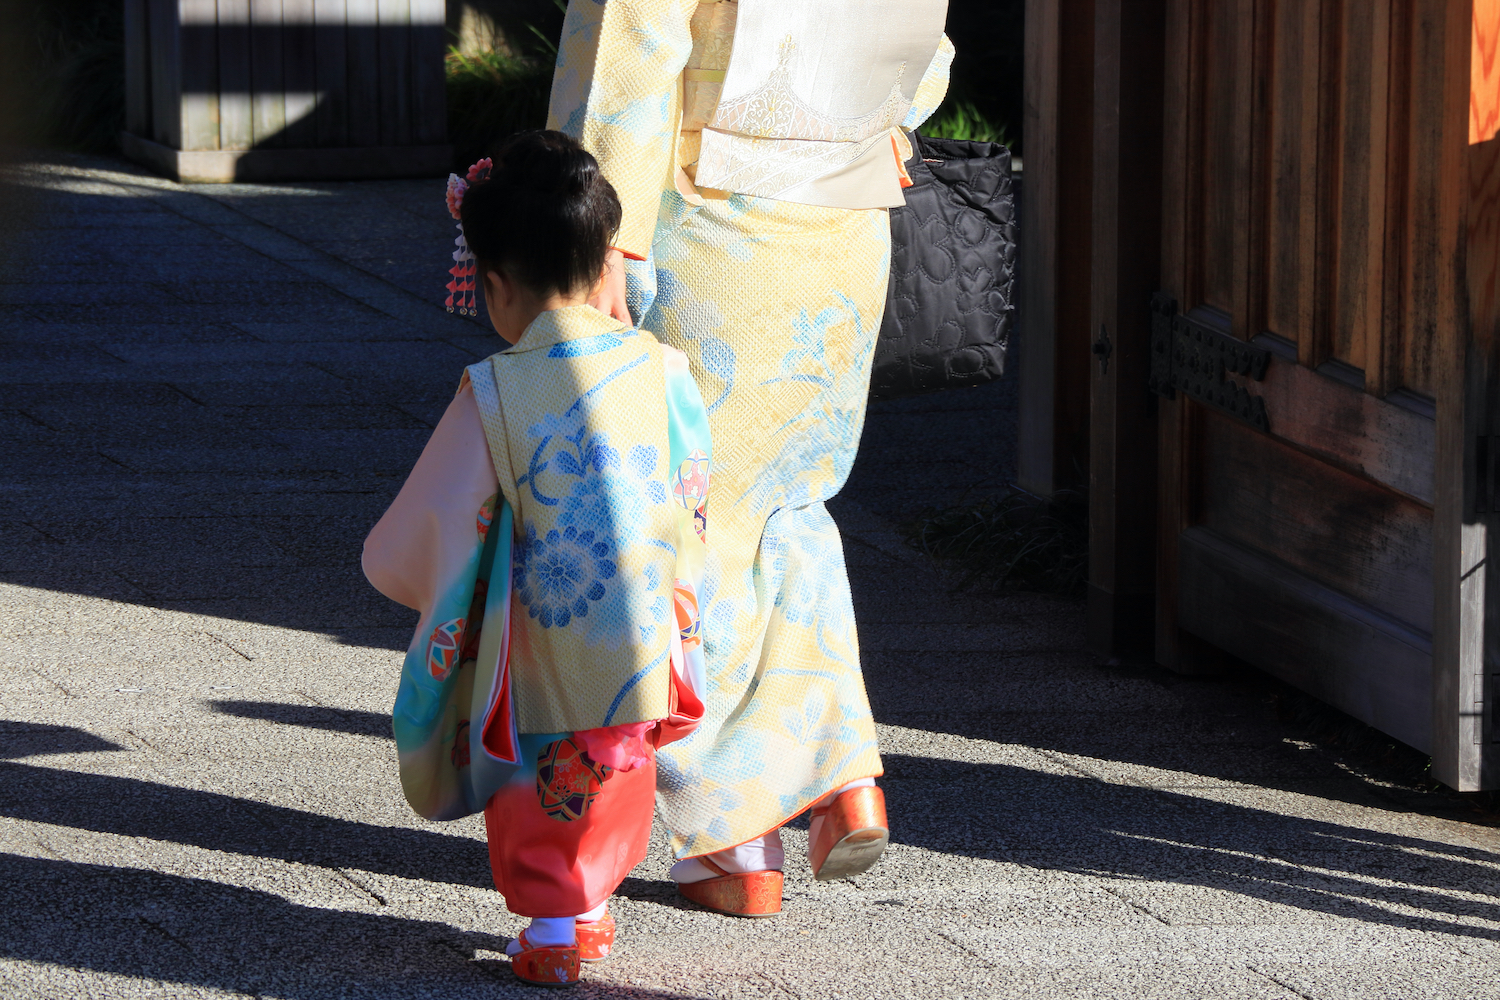 A girl in Kimono for the celebration of "Shichi-go-san". "Shichi-go-san" is an annual Japanese festival to celebrate the growth of children